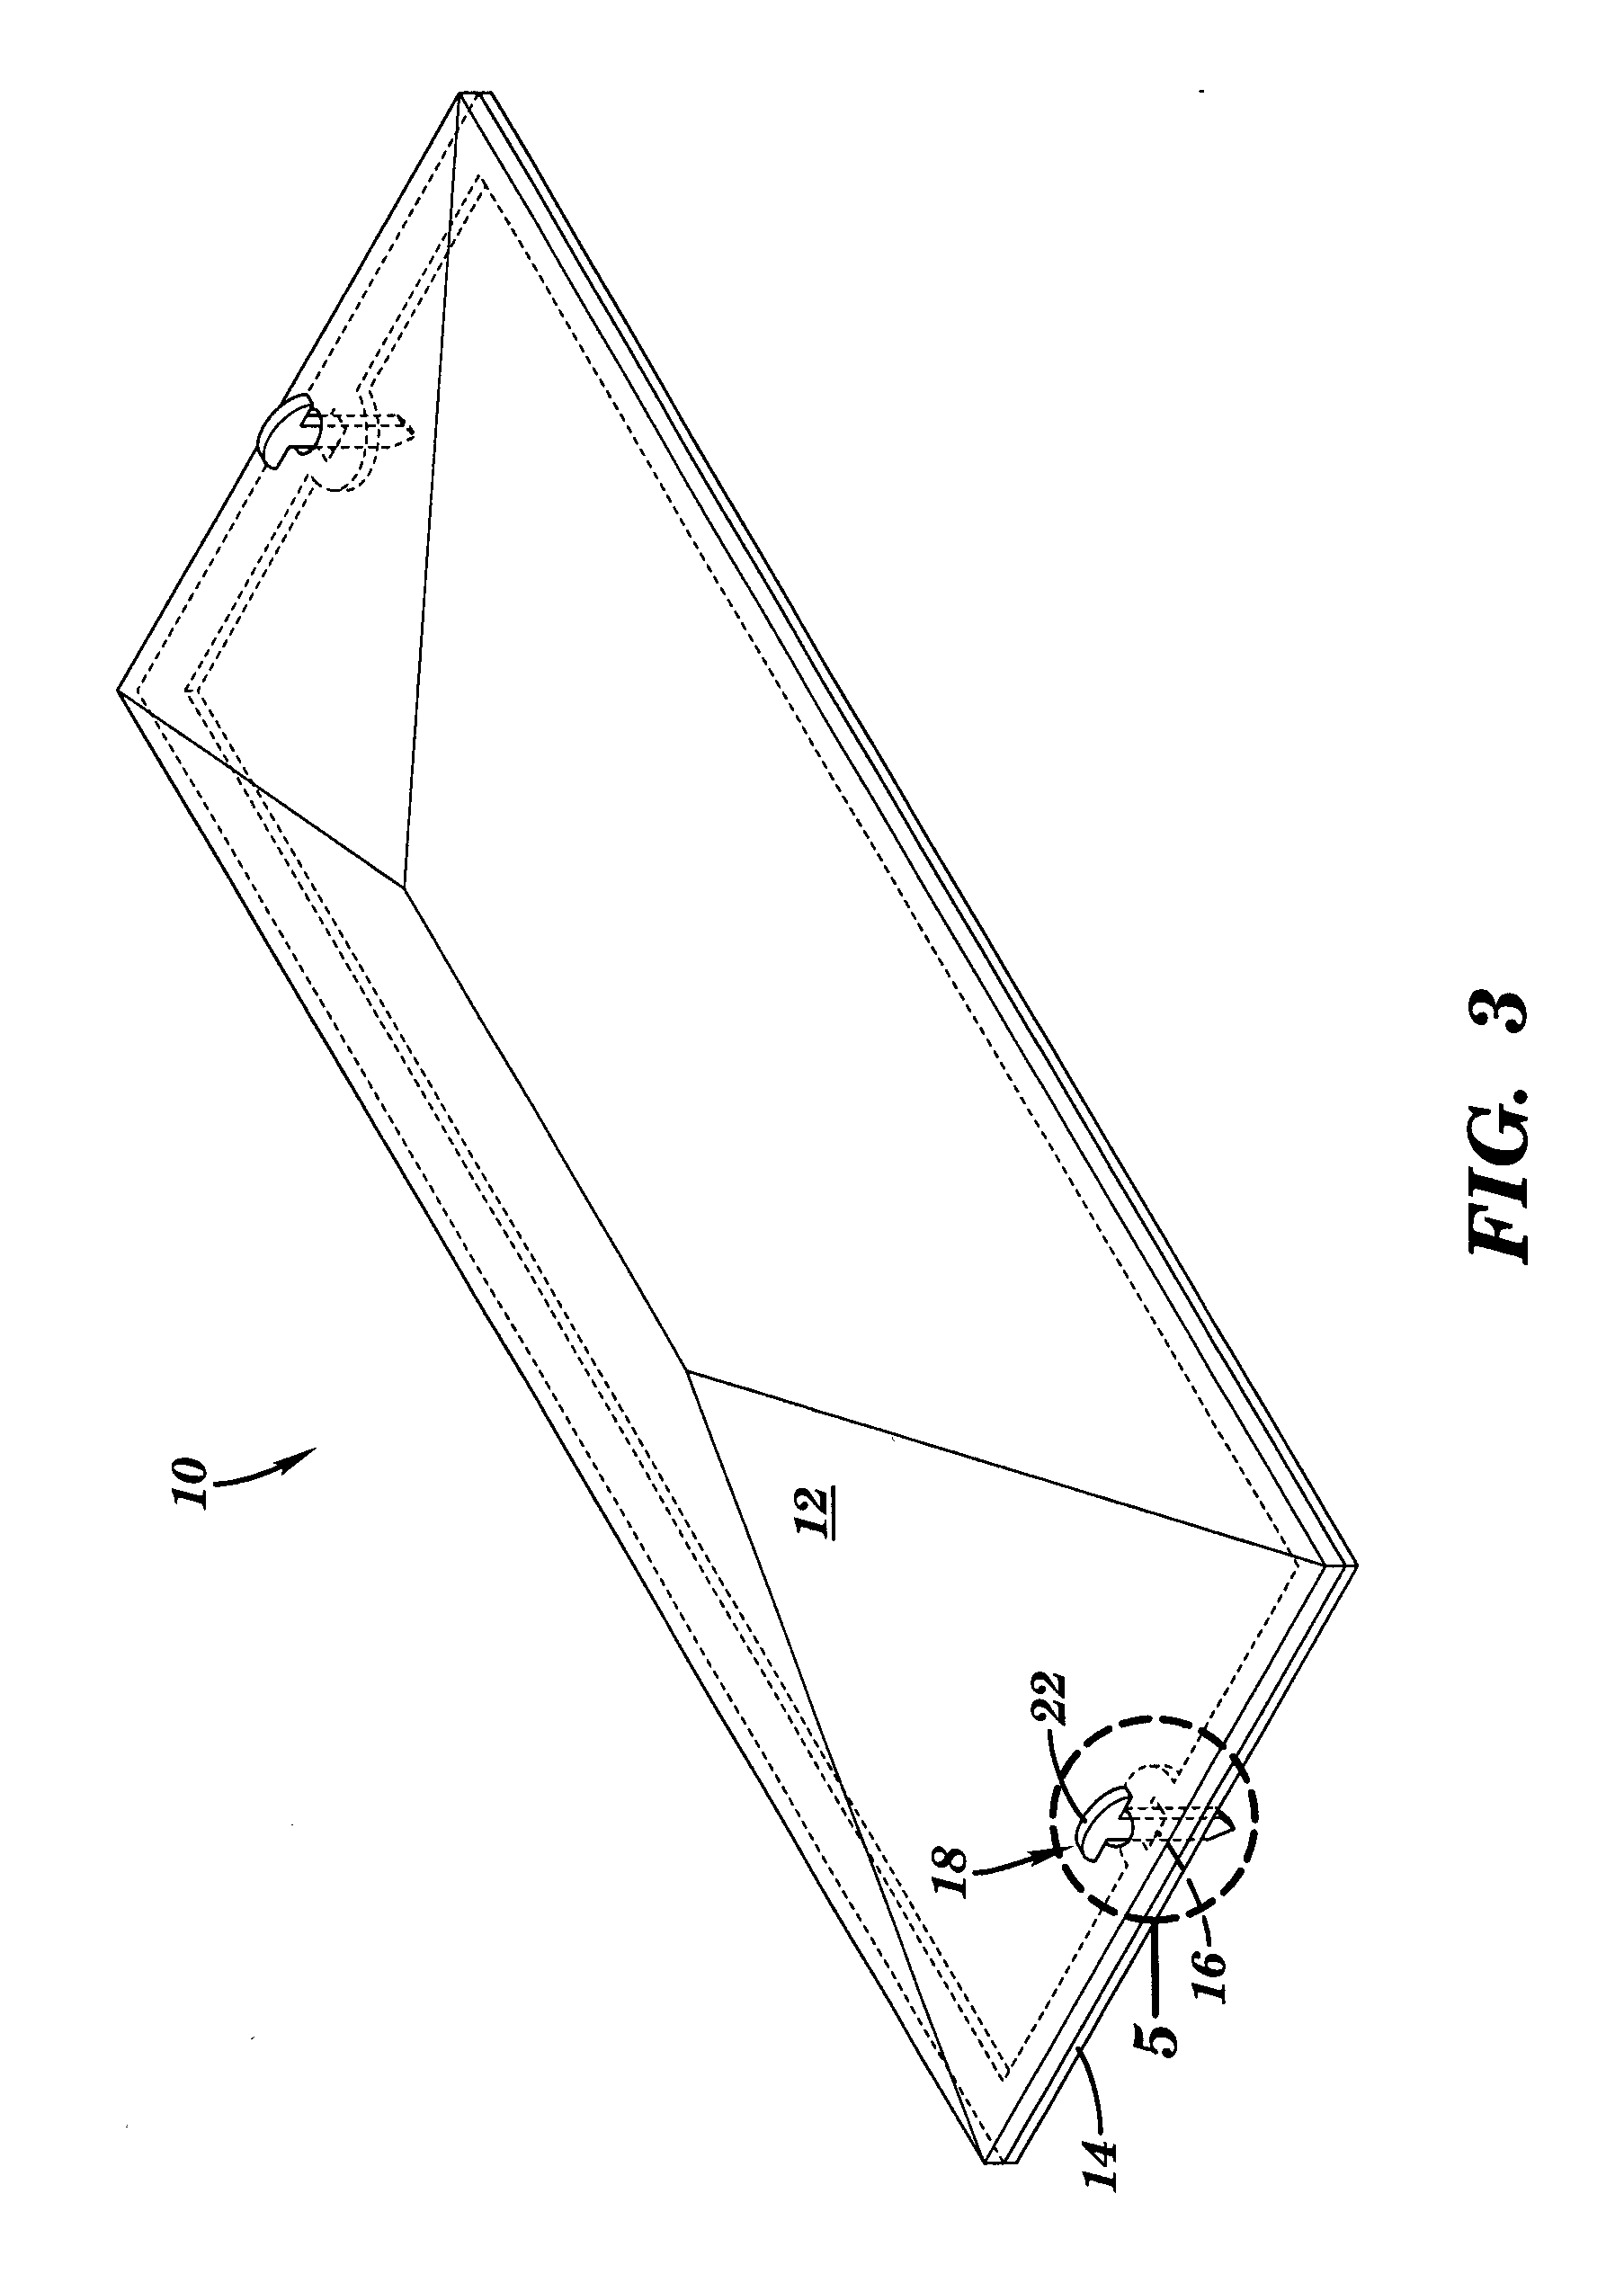 Method and apparatus for retaining an ornament